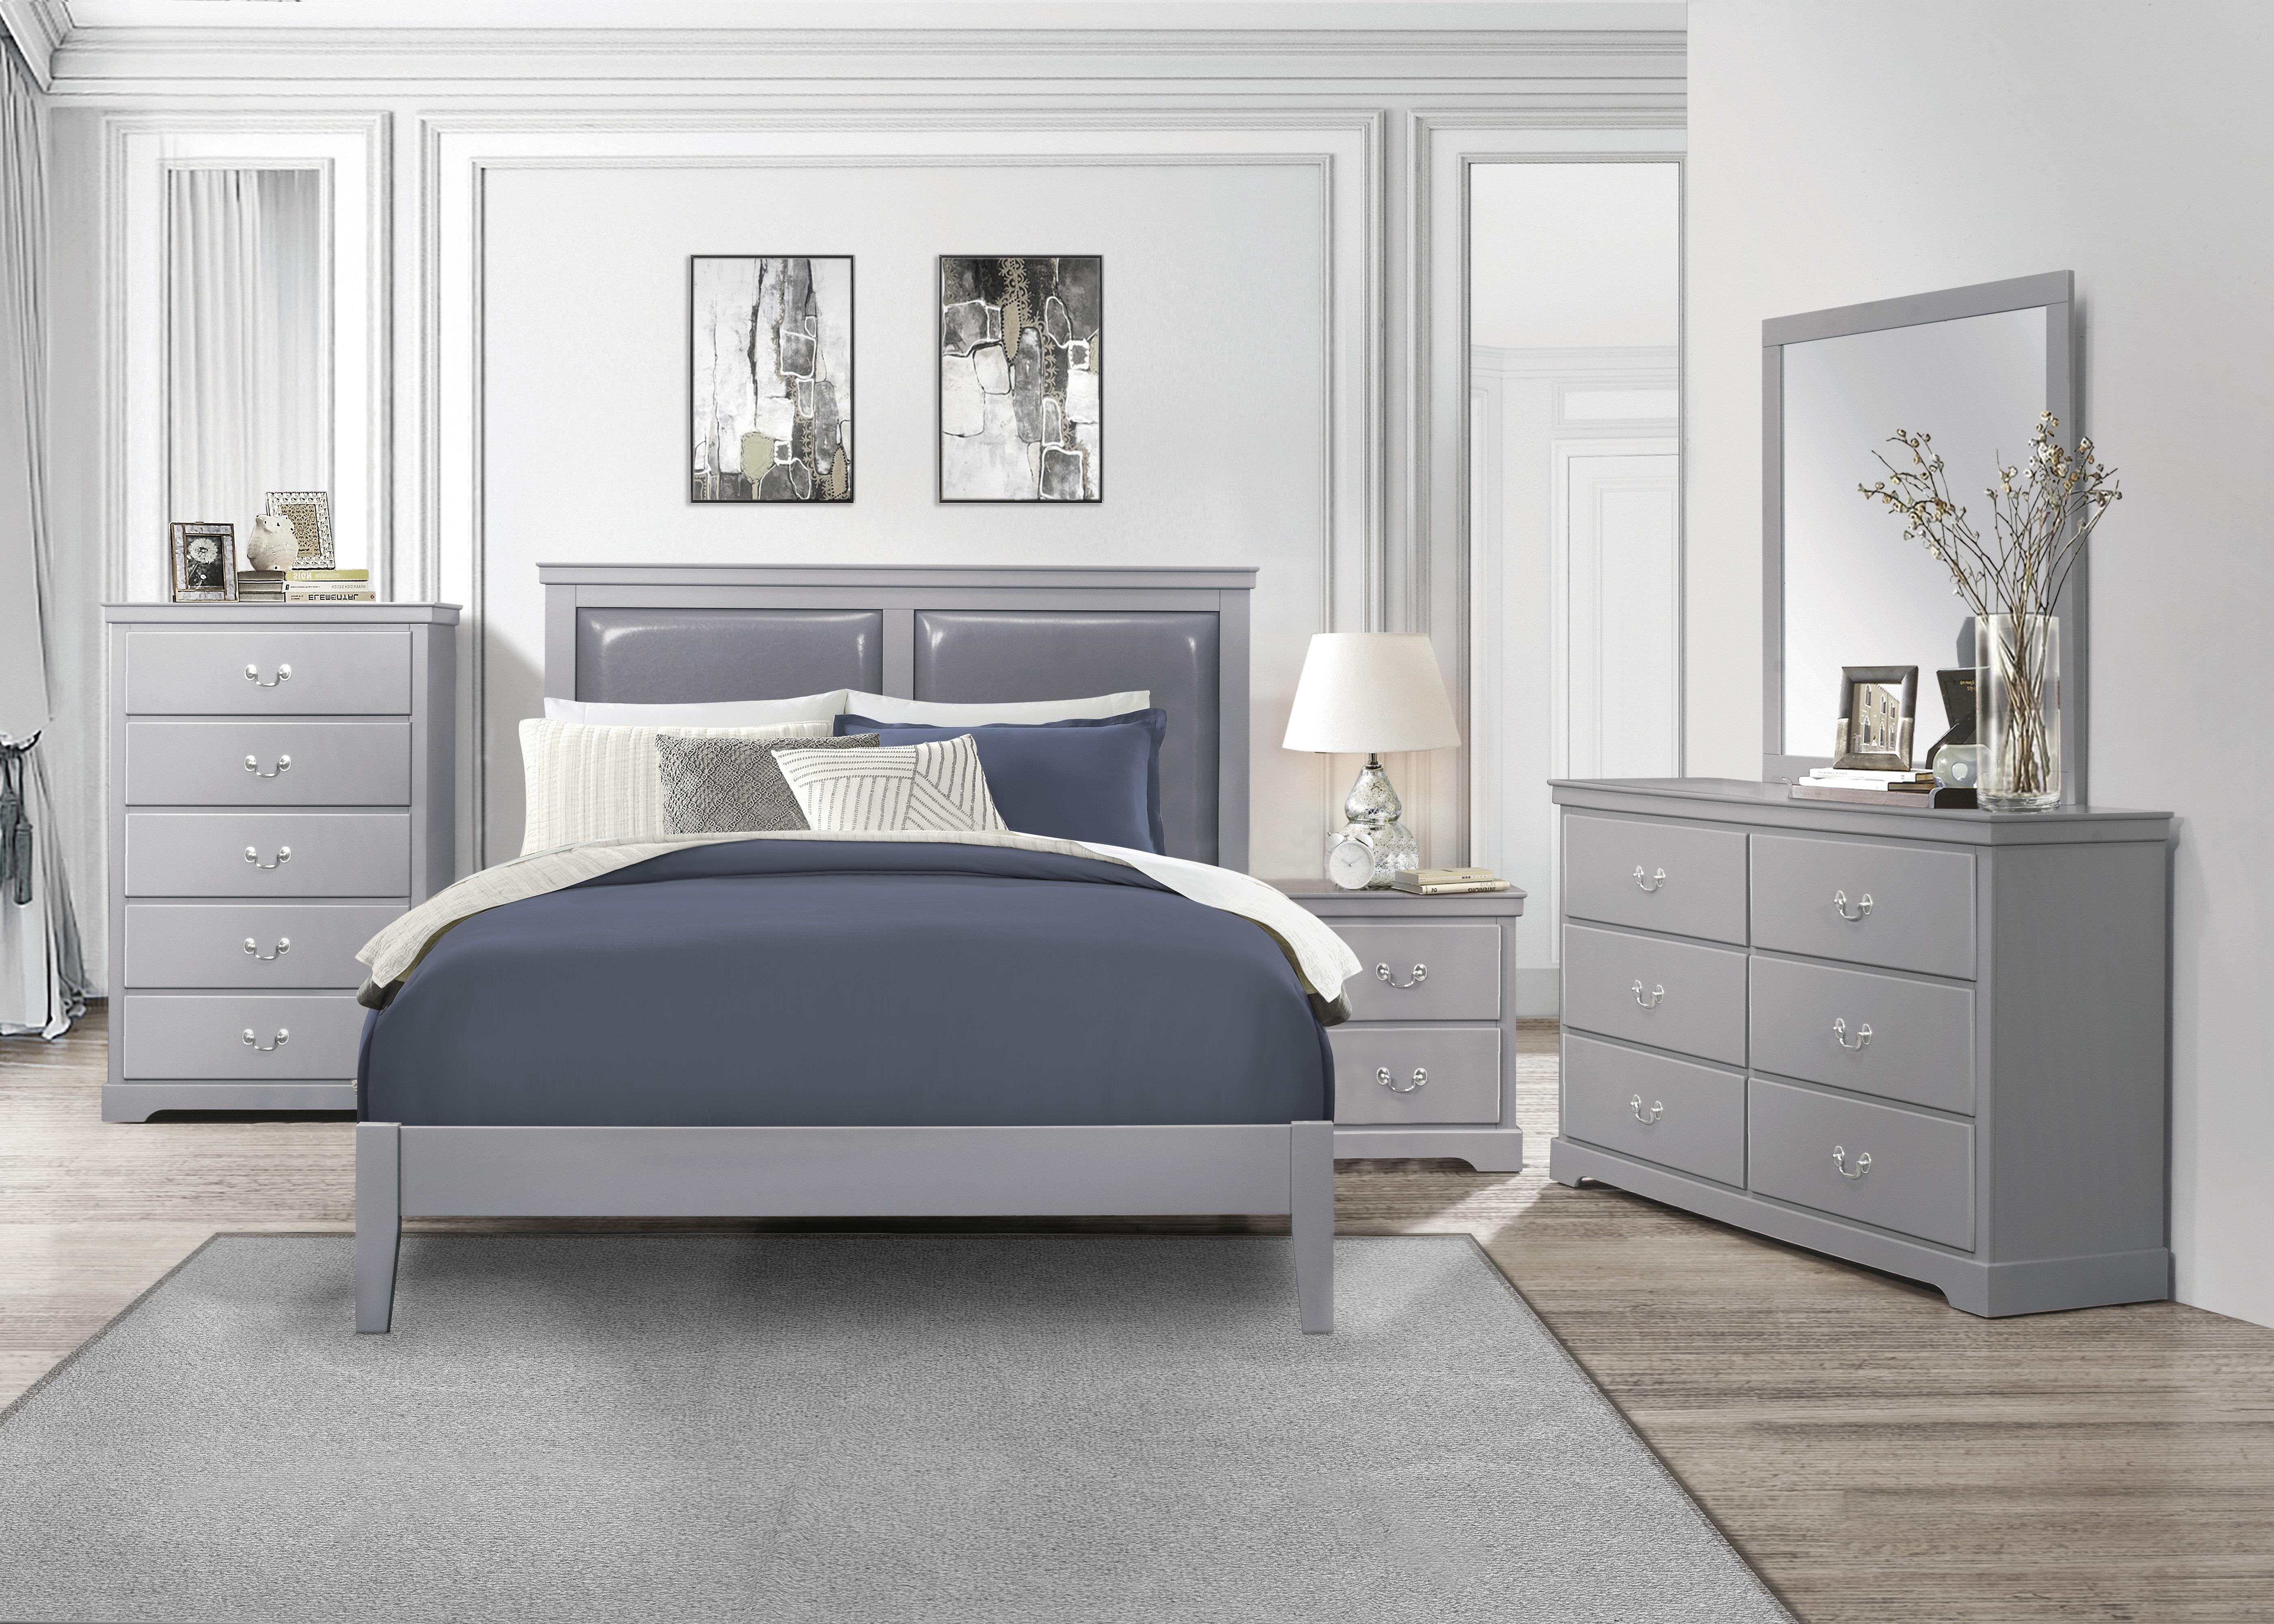 Modern Bedroom Set 1519GYF-1-6PC Seabright 1519GYF-1-6PC in Gray Faux Leather